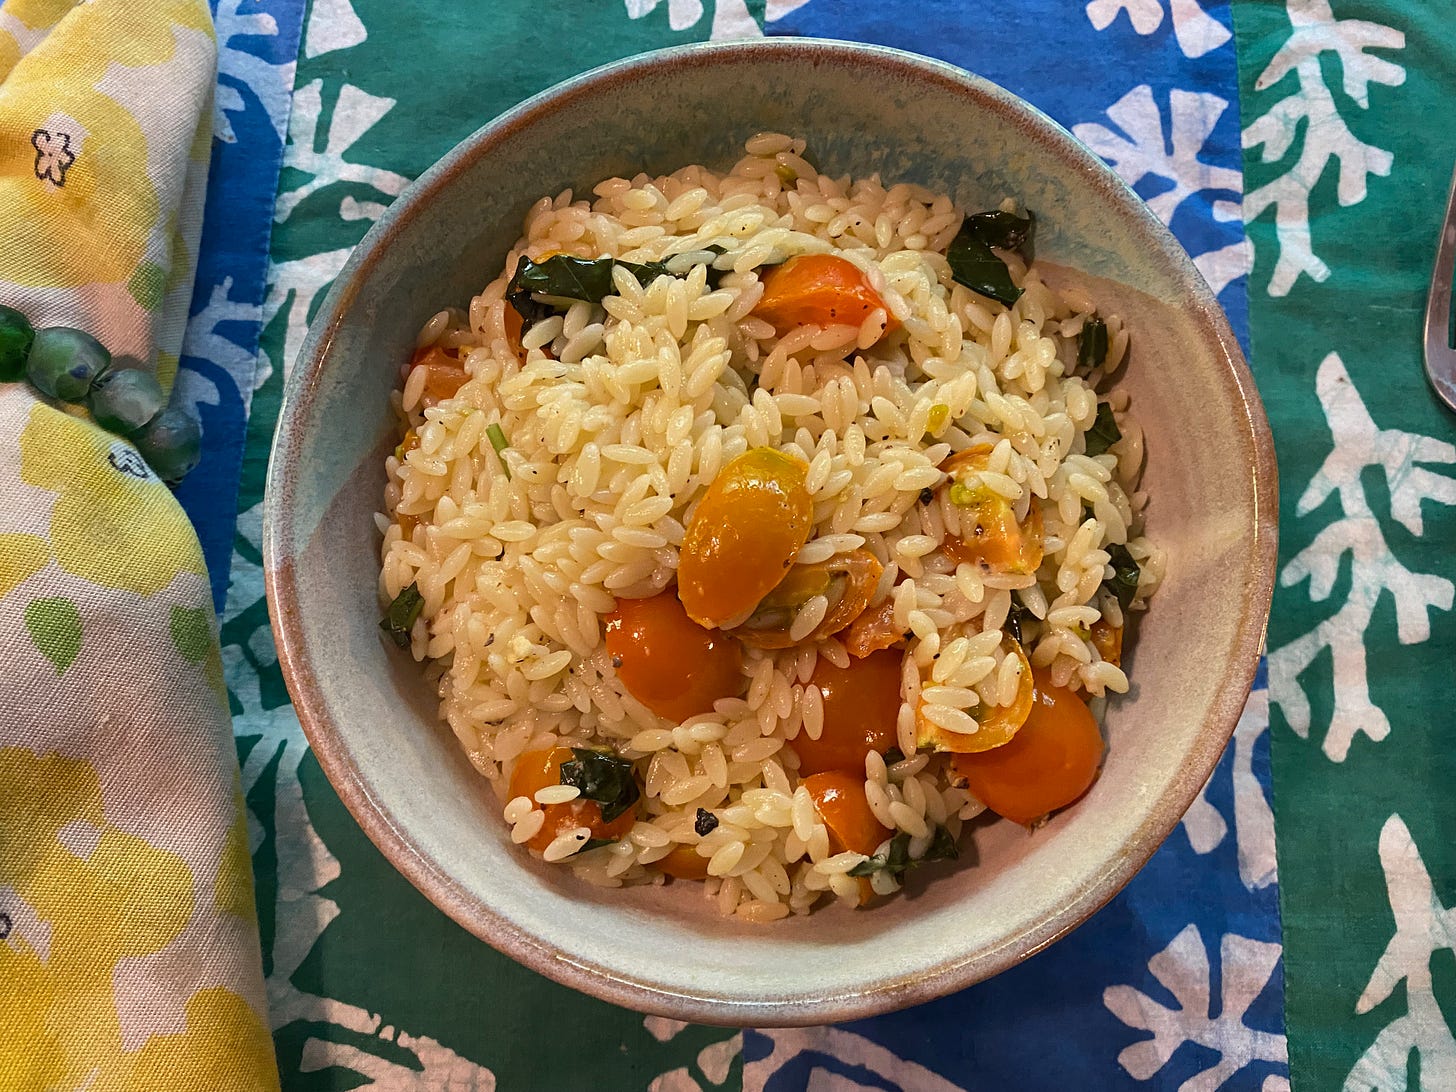 A ceramic bowl of orzo, halved sungold cherry tomatoes, and chopped basil sits on a blue and green placemat next to a yellow cloth napkin.